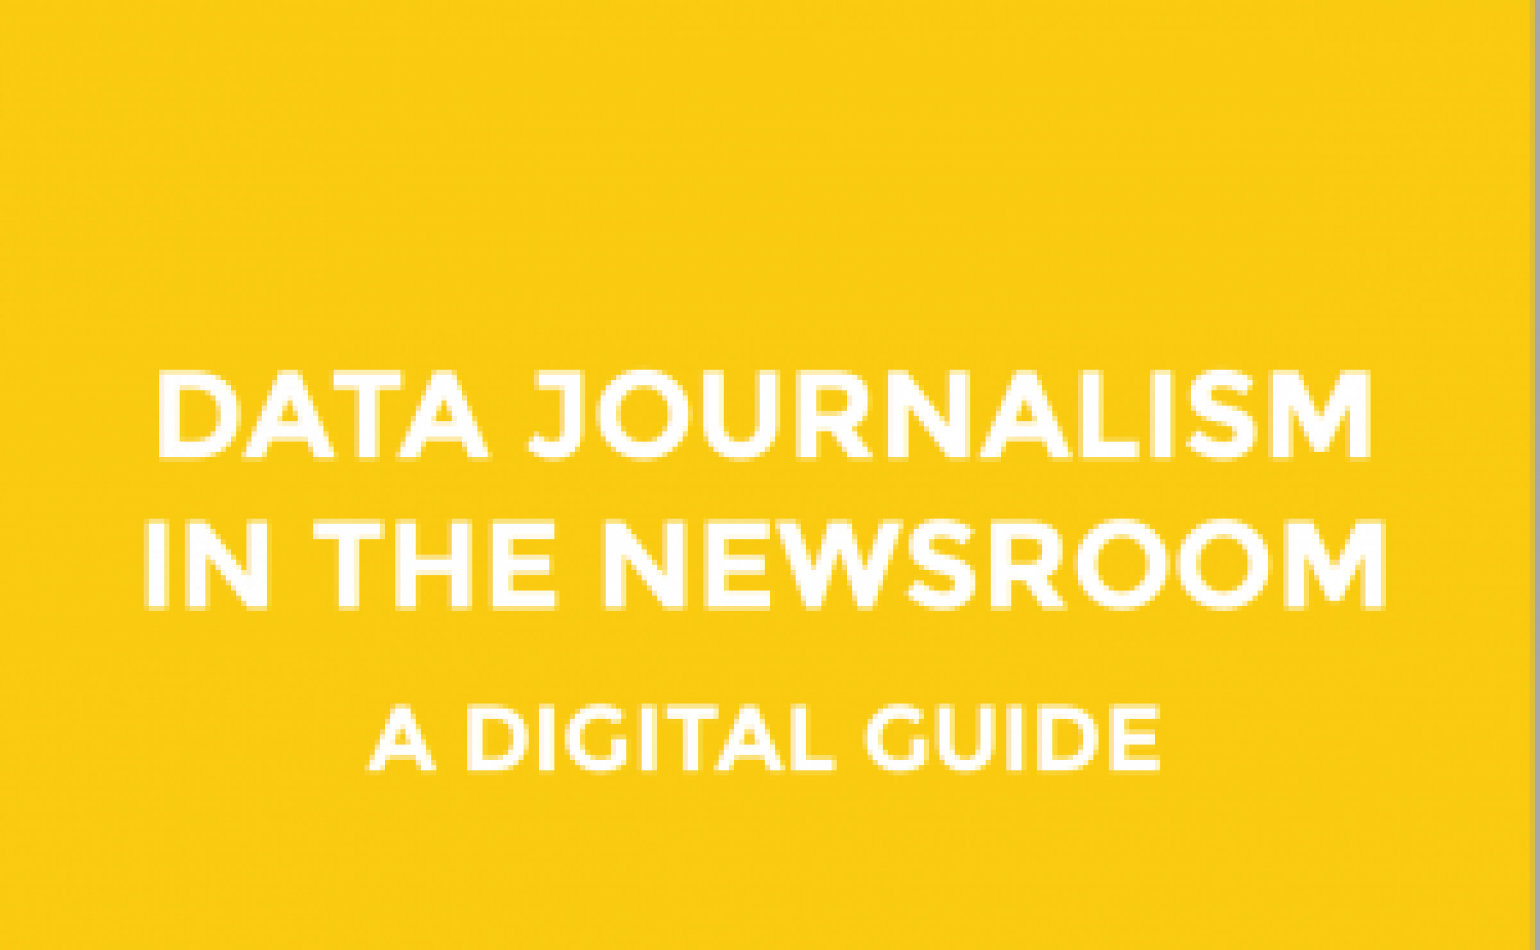 Data Journalism in the Newsroom: A Digital Guide